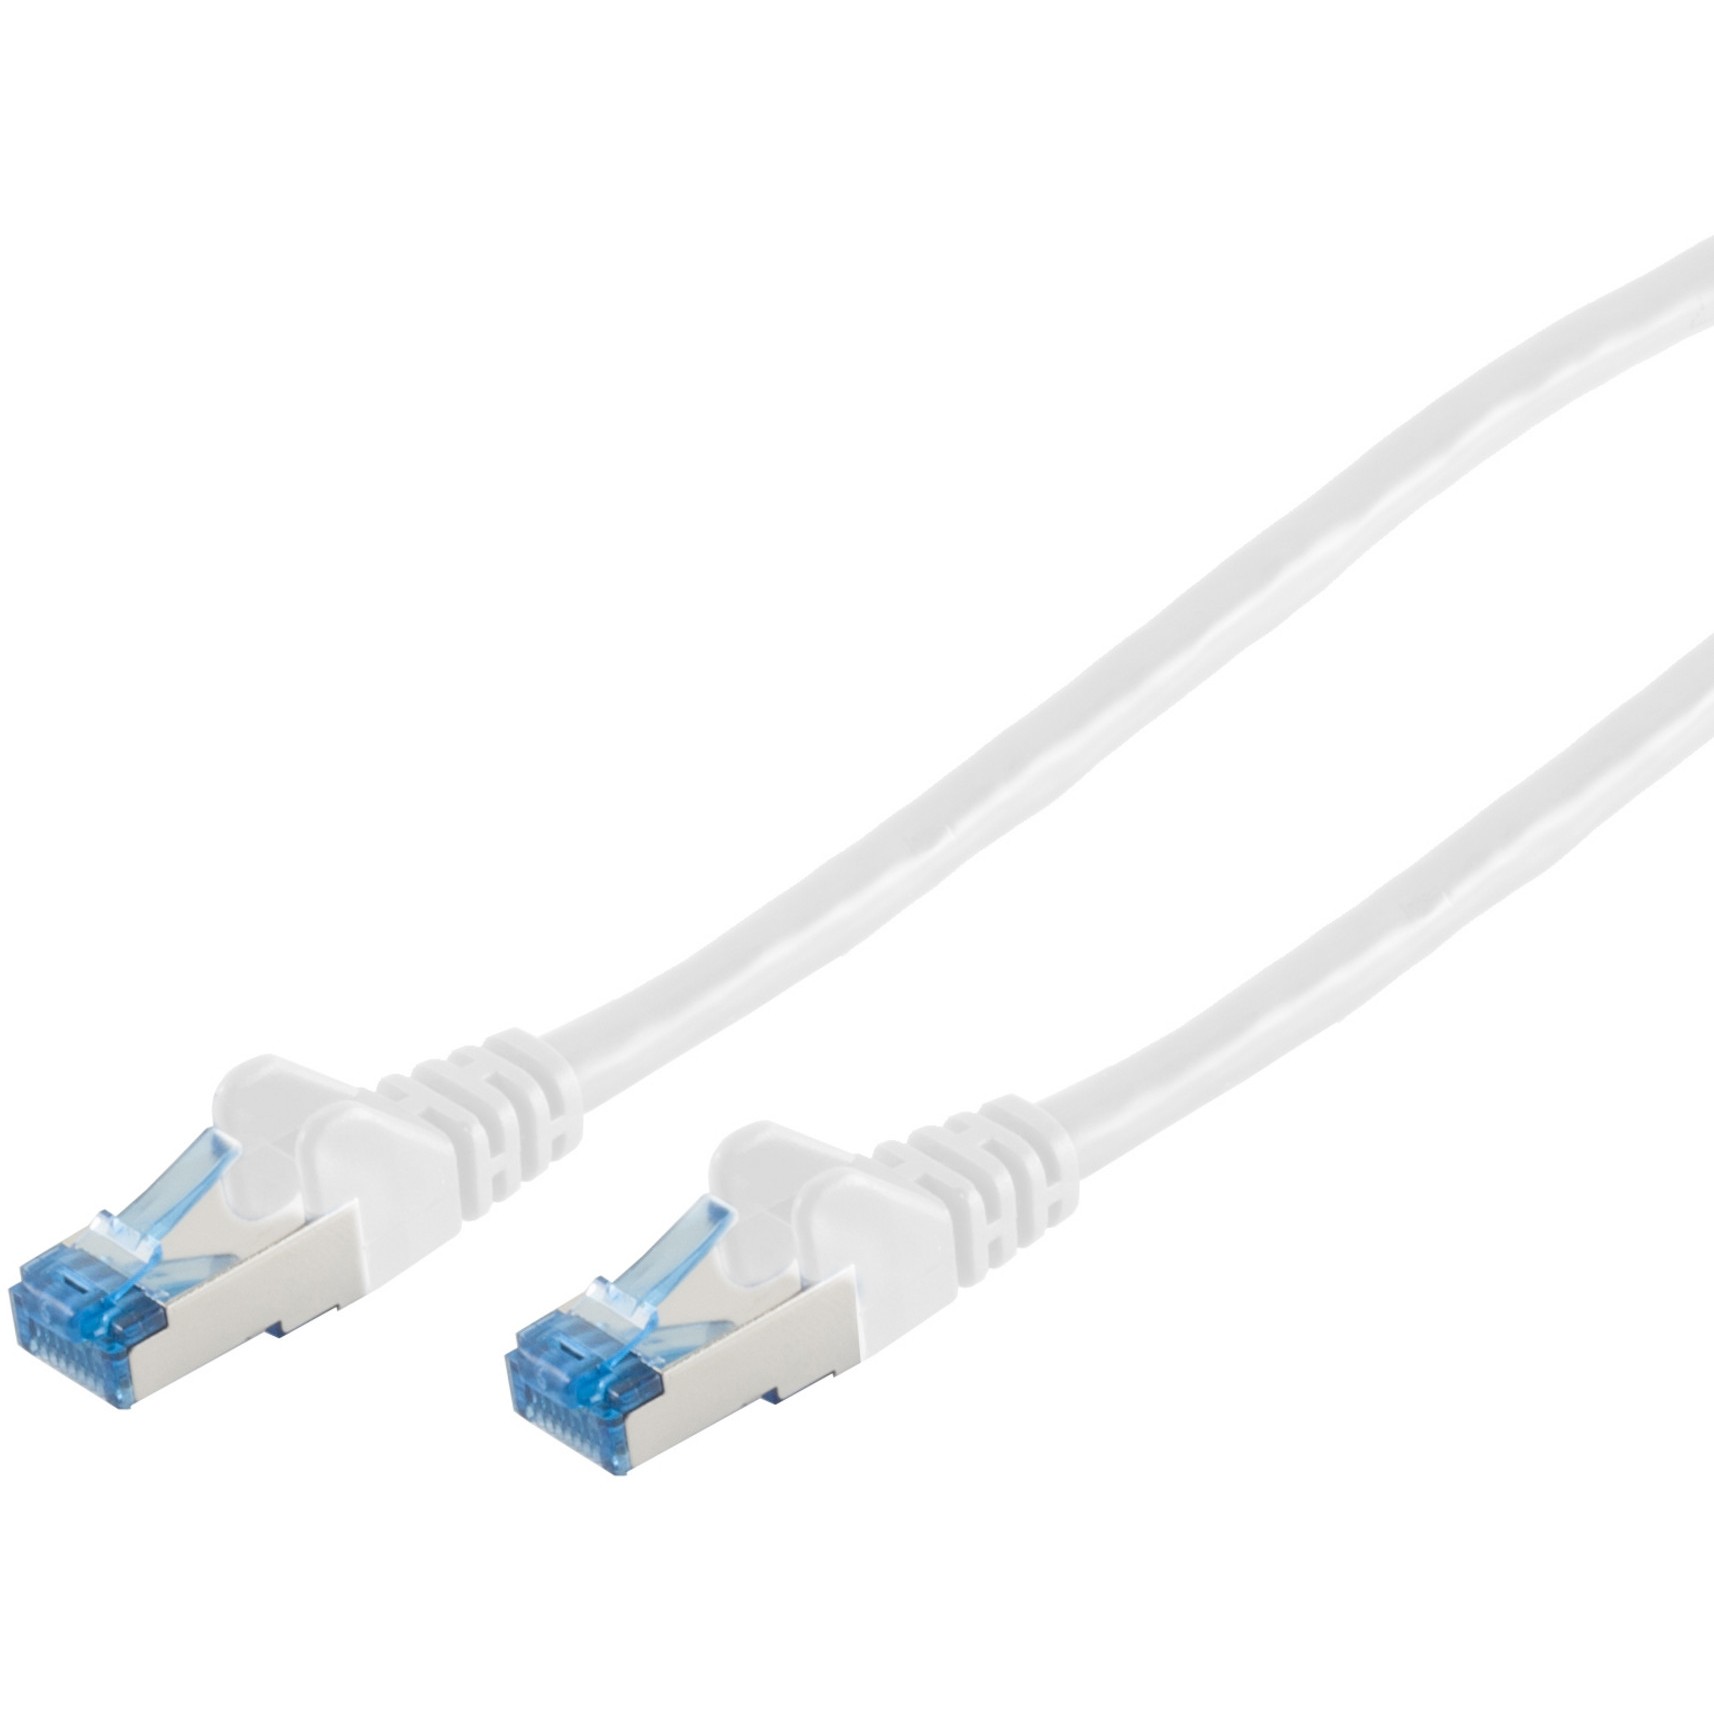 S-Conn 75720-W networking cable - 75720-W